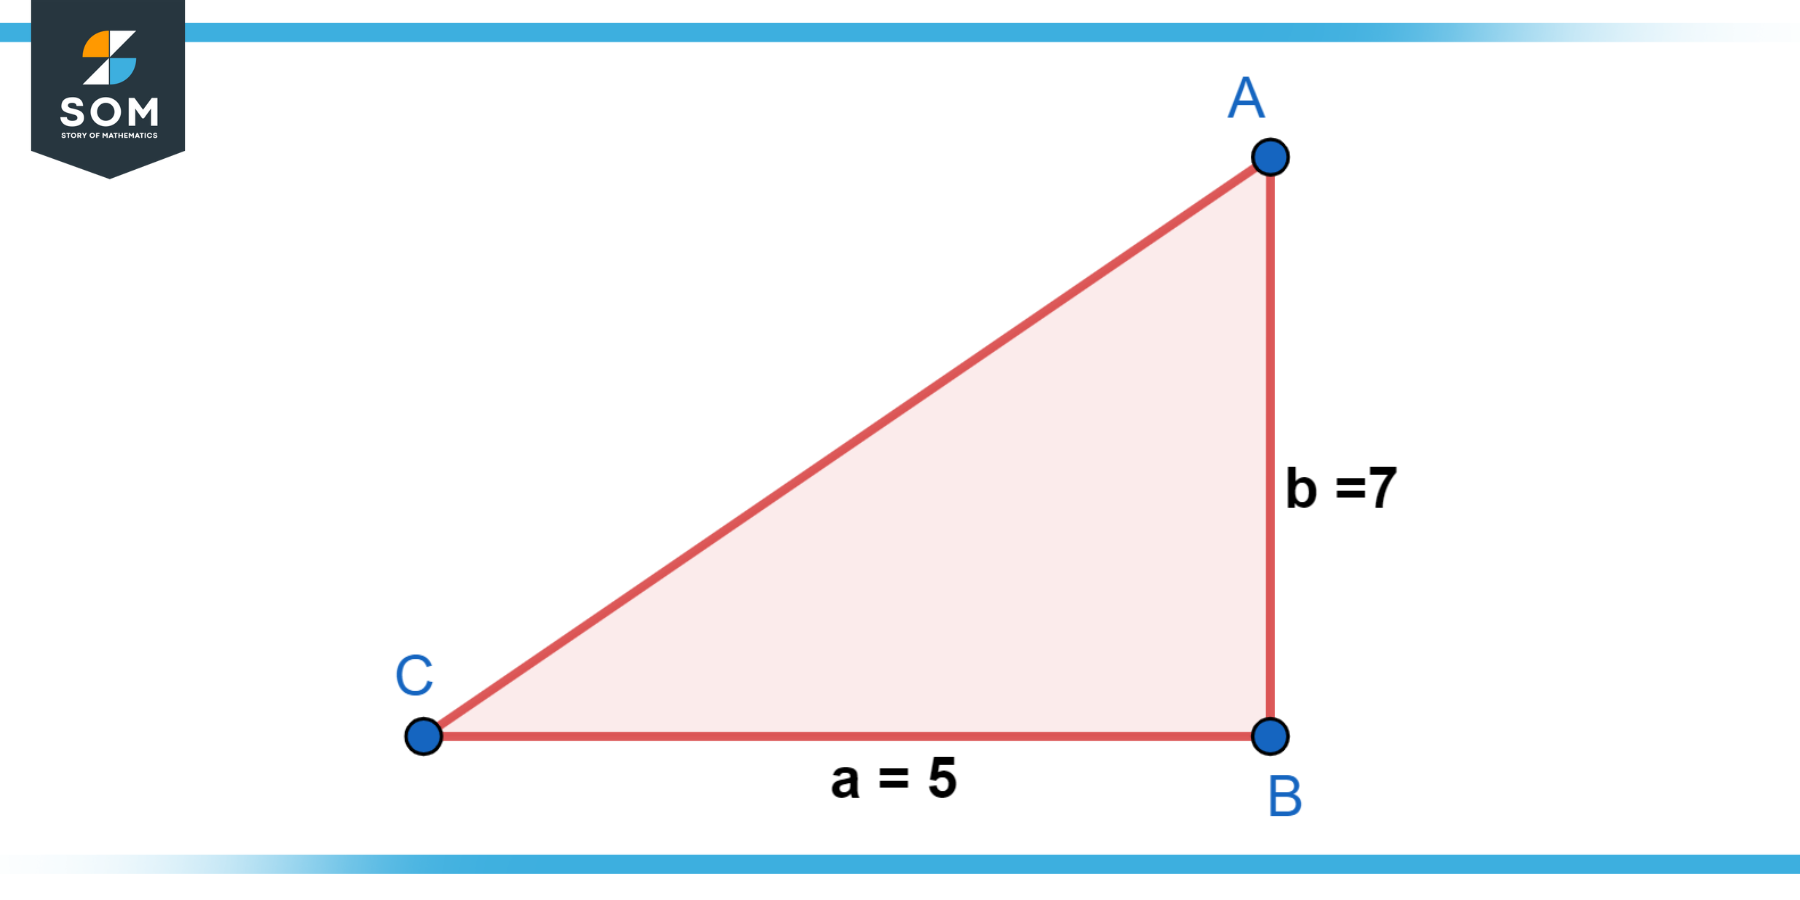 right trianglr ABC base 5 height 7